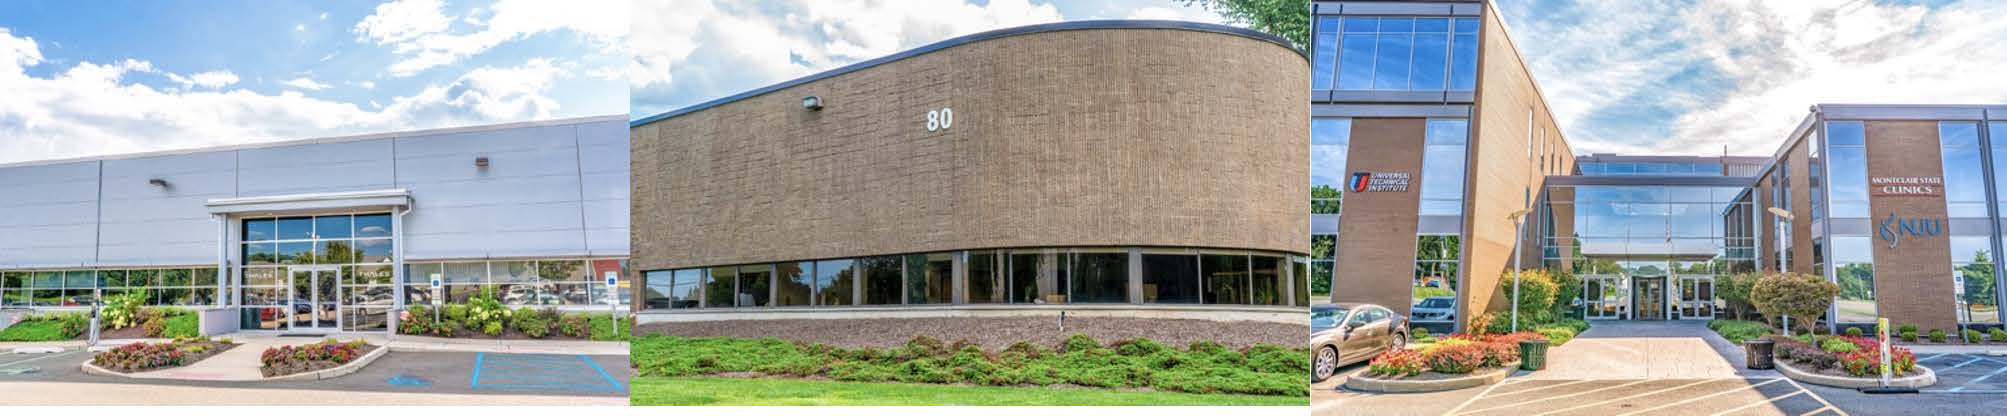 Avison Young arranges 162,500 square feet in office, industrial and life sciences leases on behalf of Shelbourne in Piscataway and Bloomfield, NJ